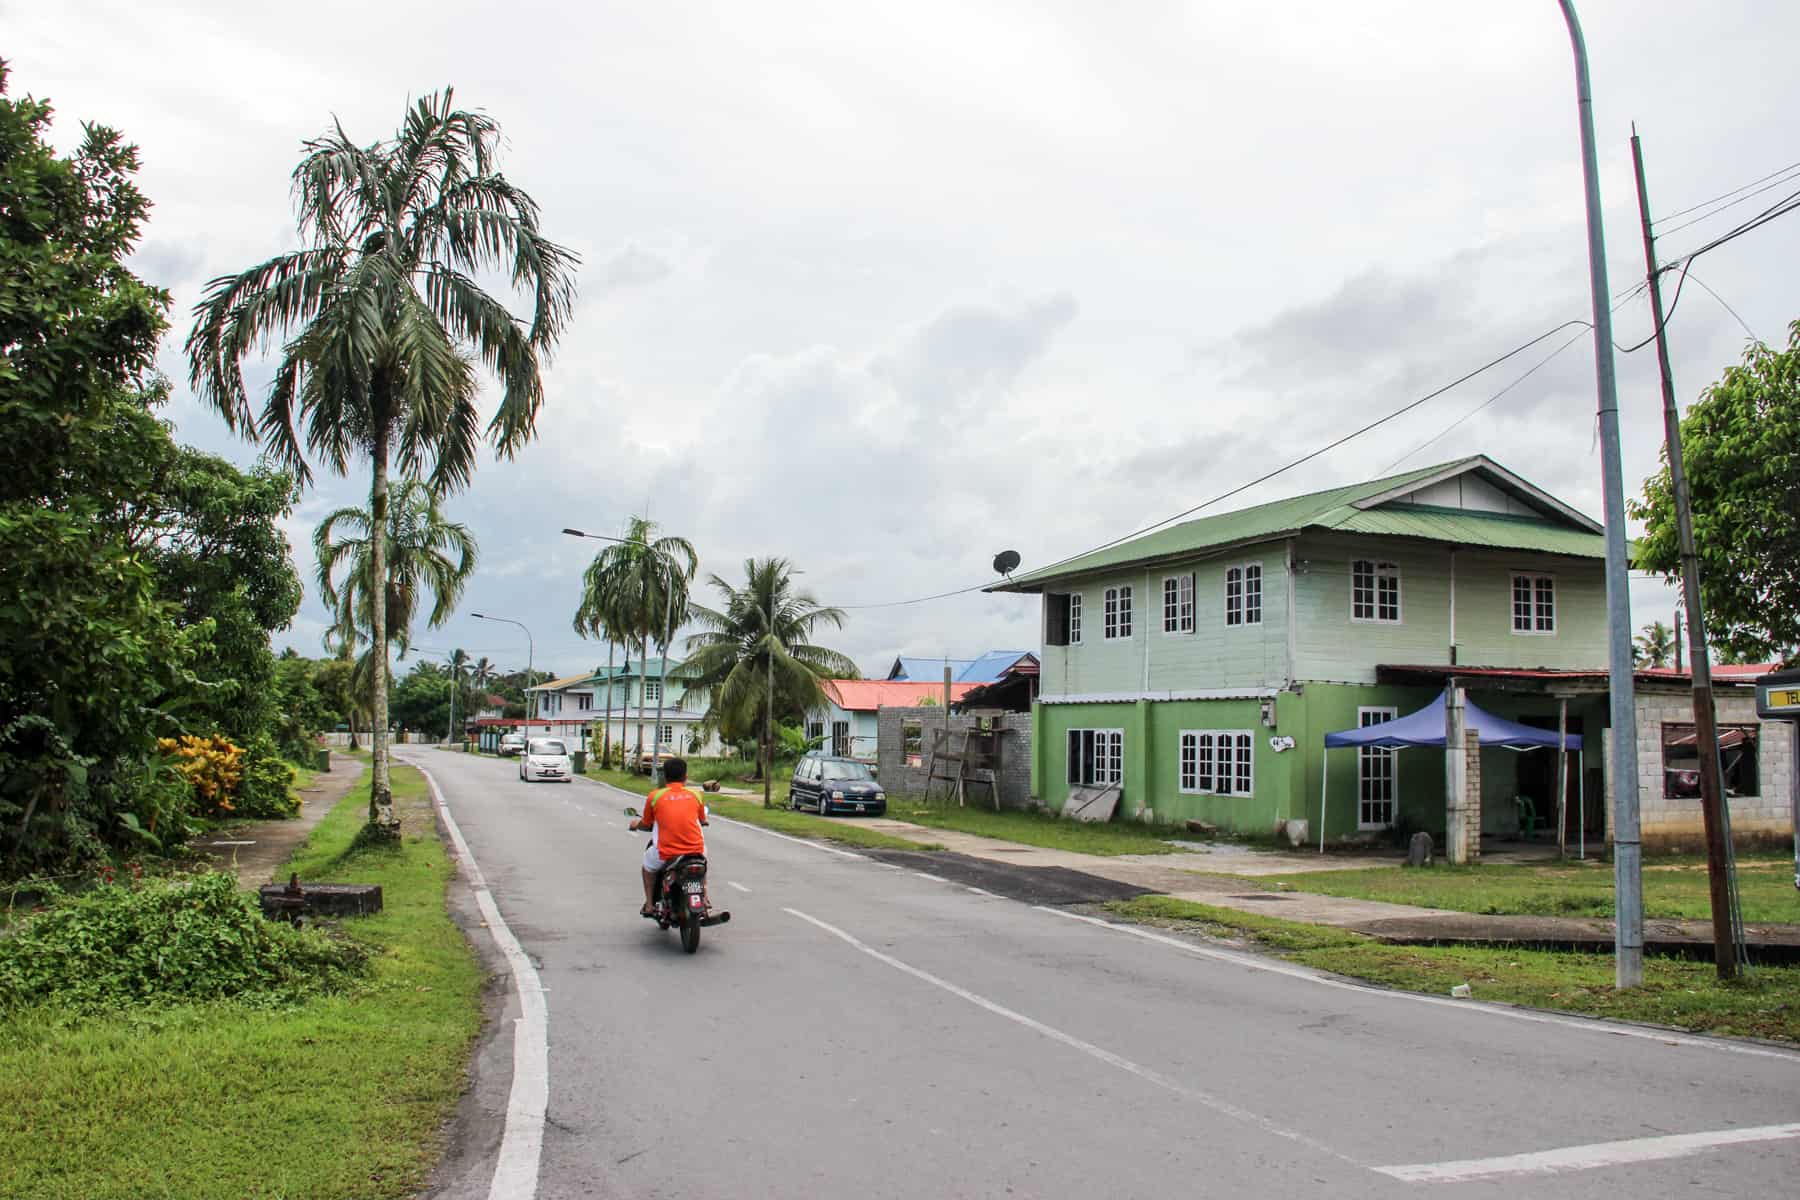 A man in an organe t-shirt rides a motor bike on a paved road past a mint green wooden house in a local neighbourhood in Kuching